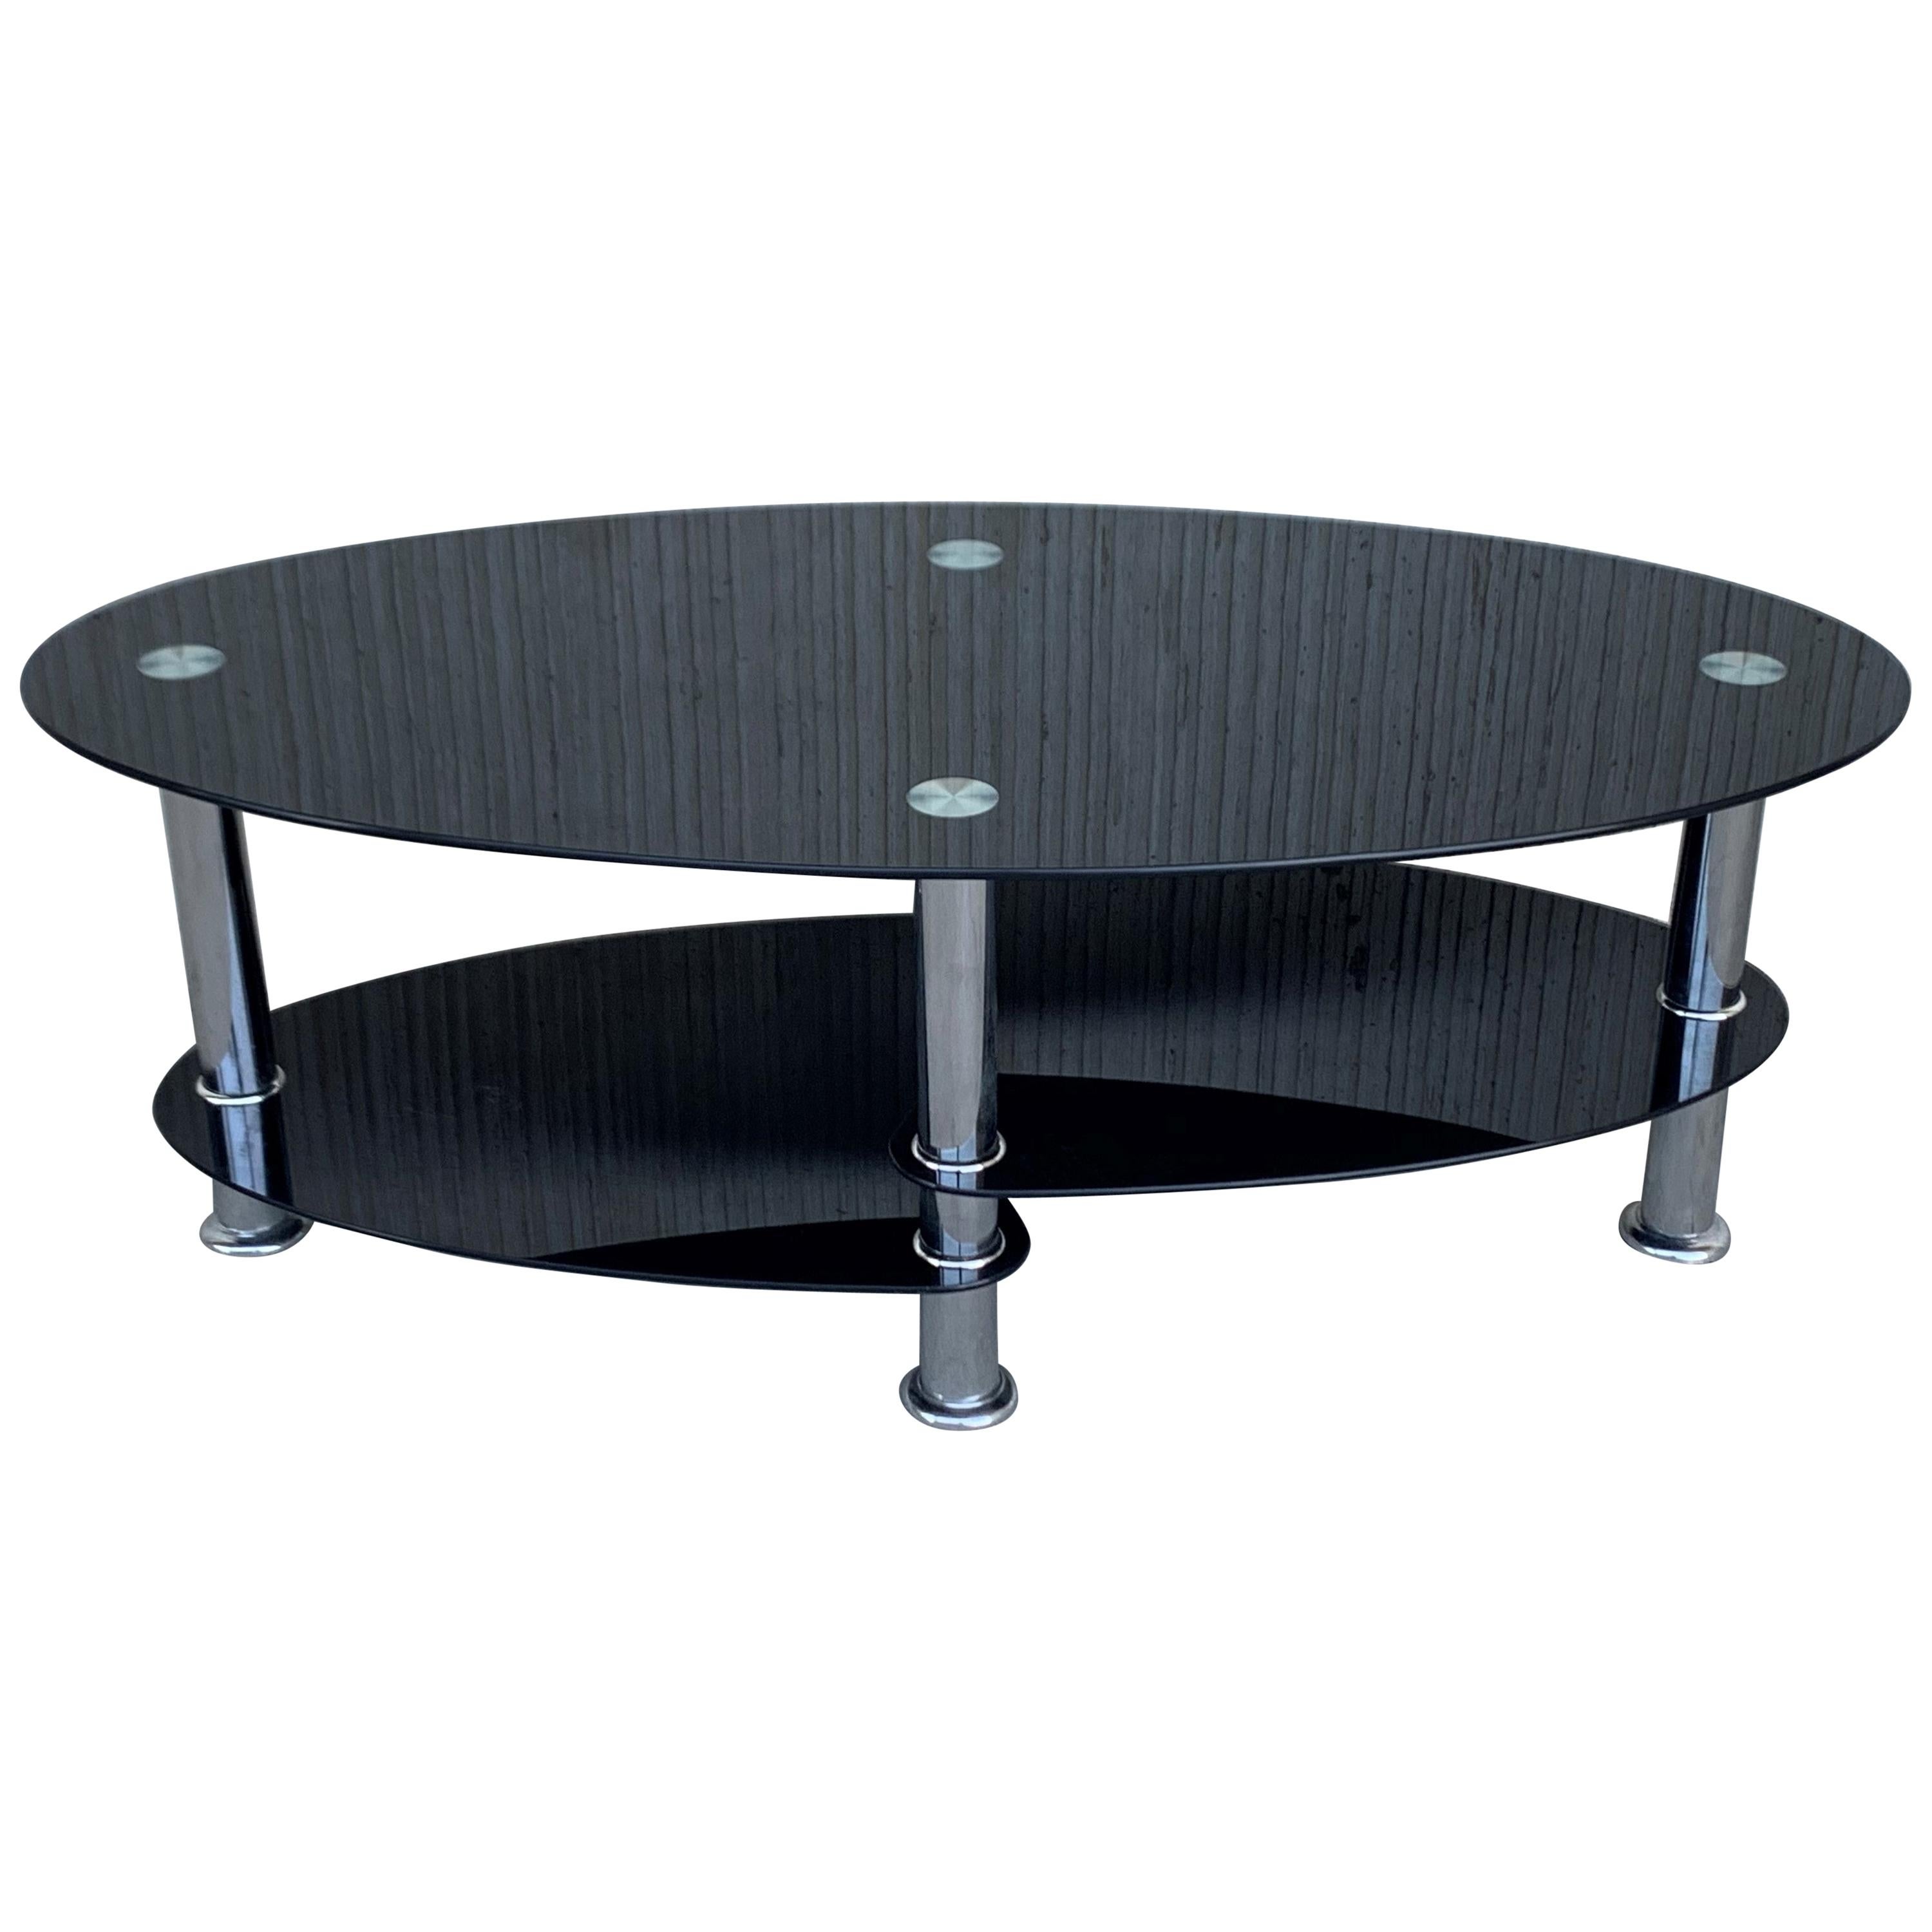 Midcentury Oval Art Deco Center Table in Black Glass Tops and Chrome